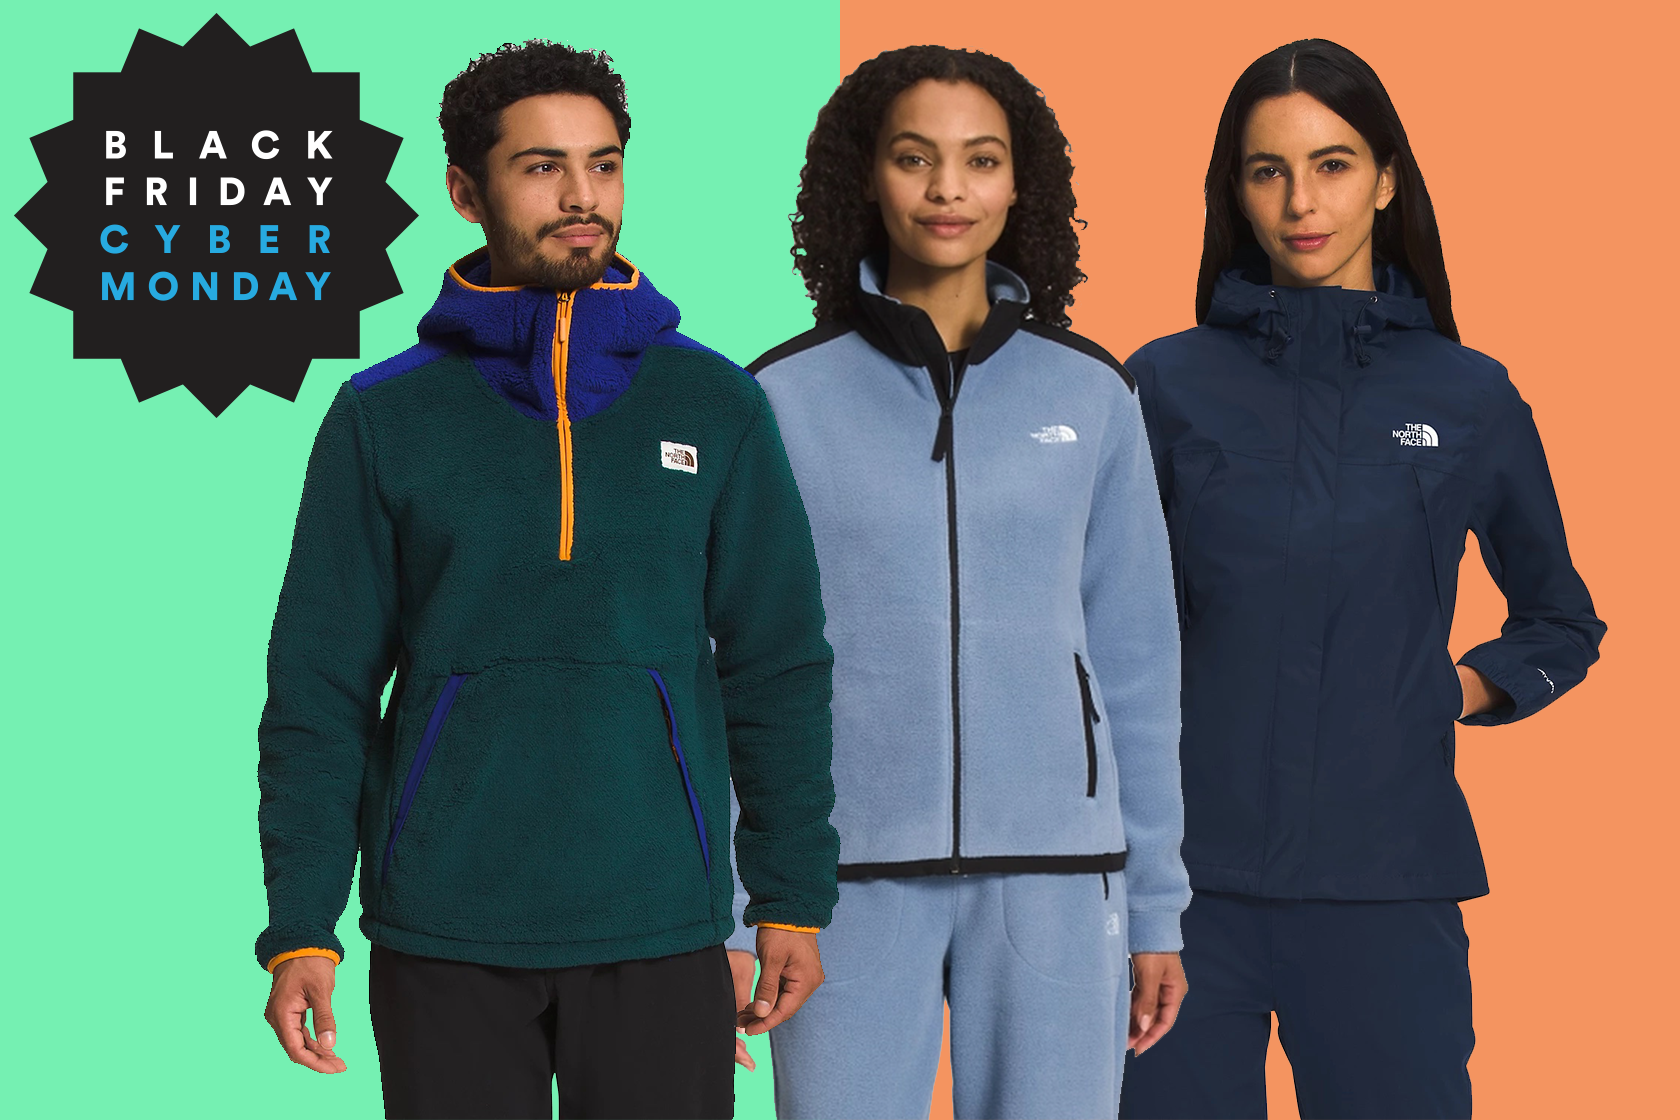 zone Wat leuk Marxisme North Face Black Friday: 5 jackets you can get under $100